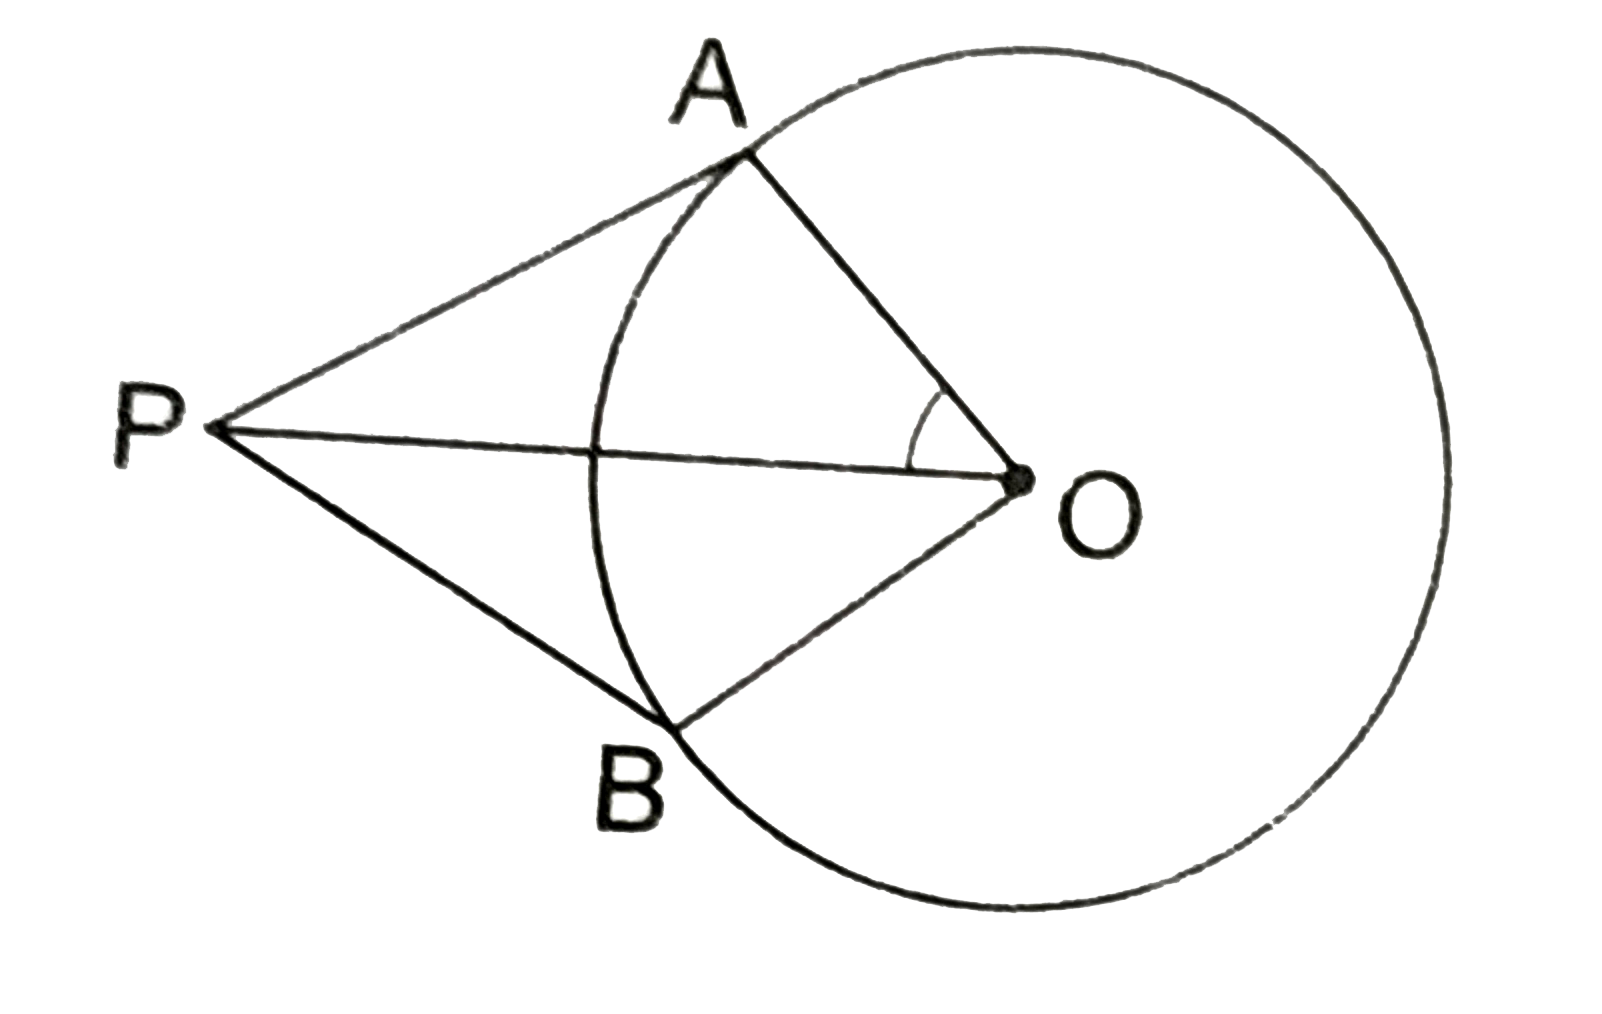 If PA and PB are two tangents to a circle with centre O such that /APB=80^(@).  Then, /AOP=?